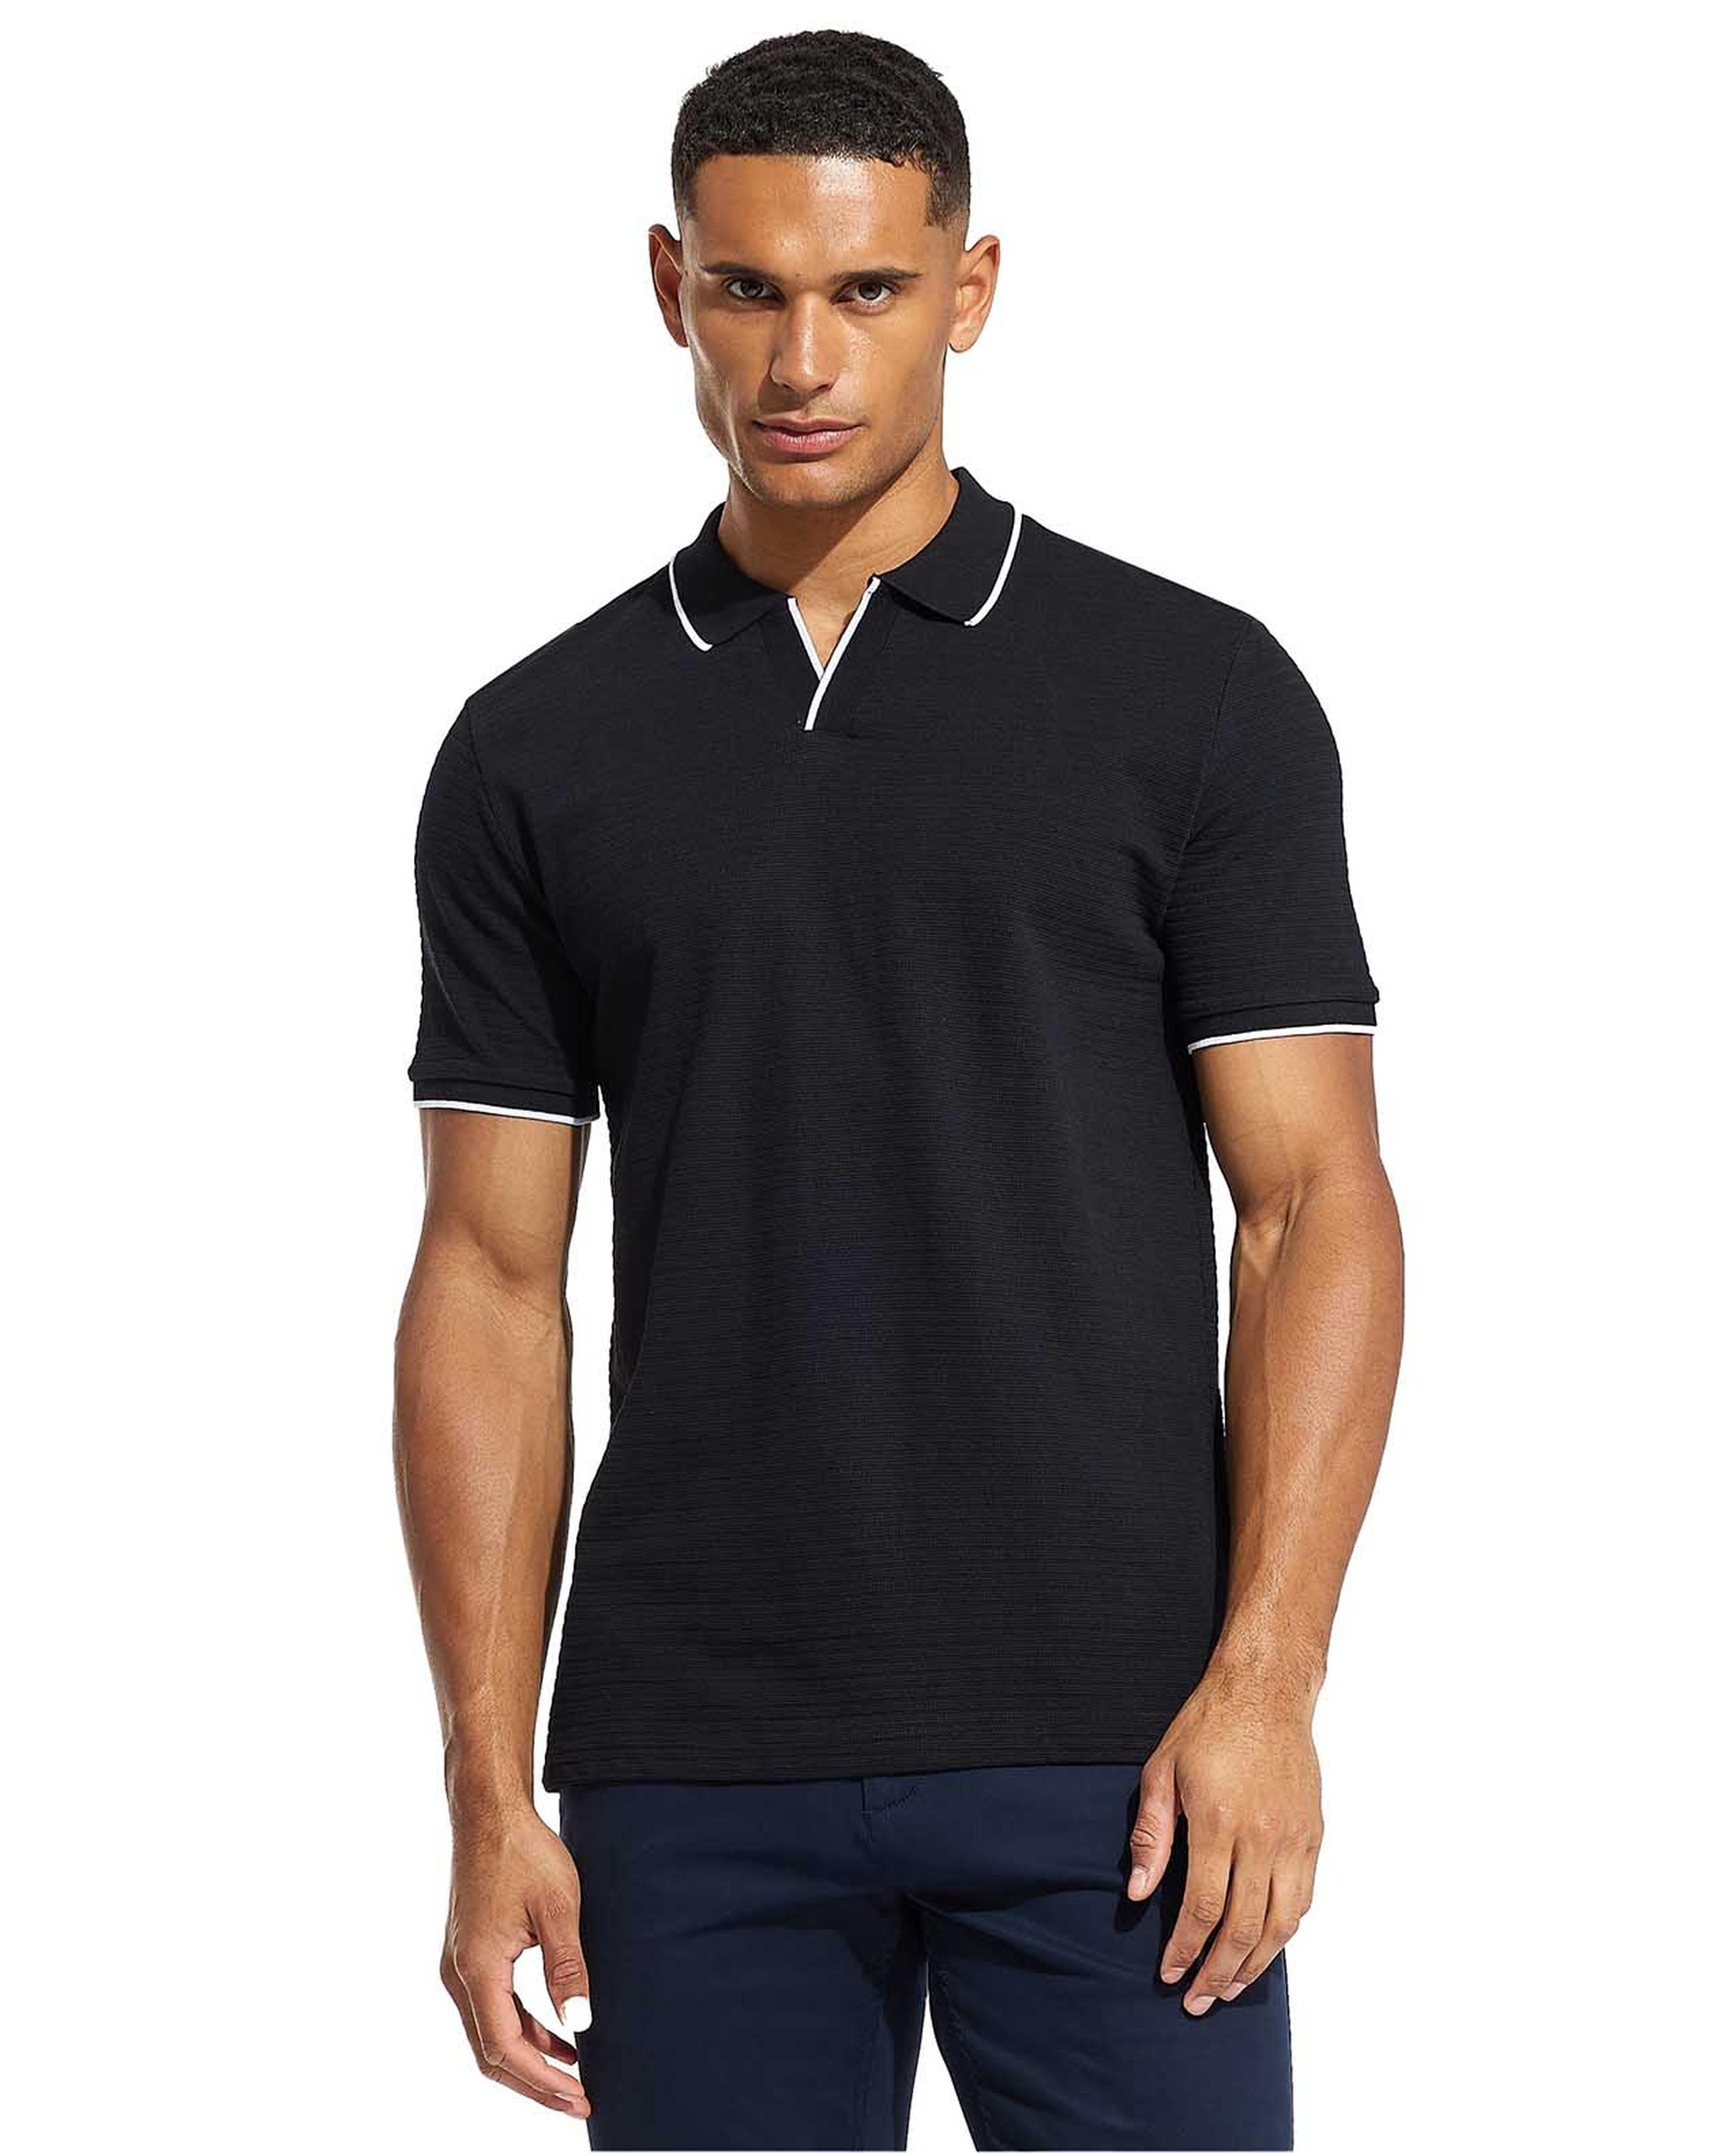 Contrast Trim Polo T-Shirt with Short Sleeves